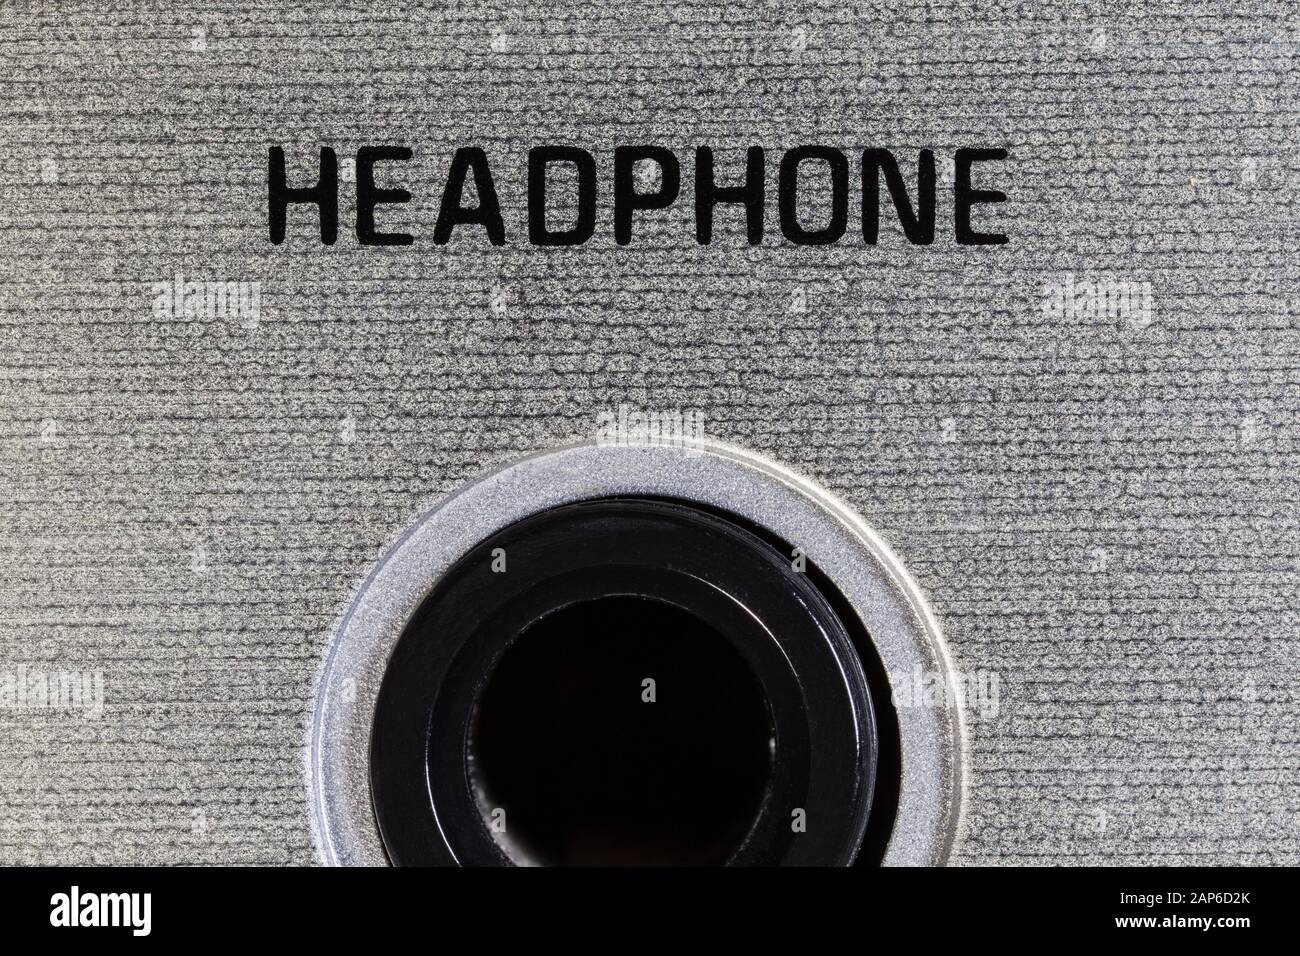 Close up macro photograph of headphone jack on vintage boombox stereo. Stock Photo